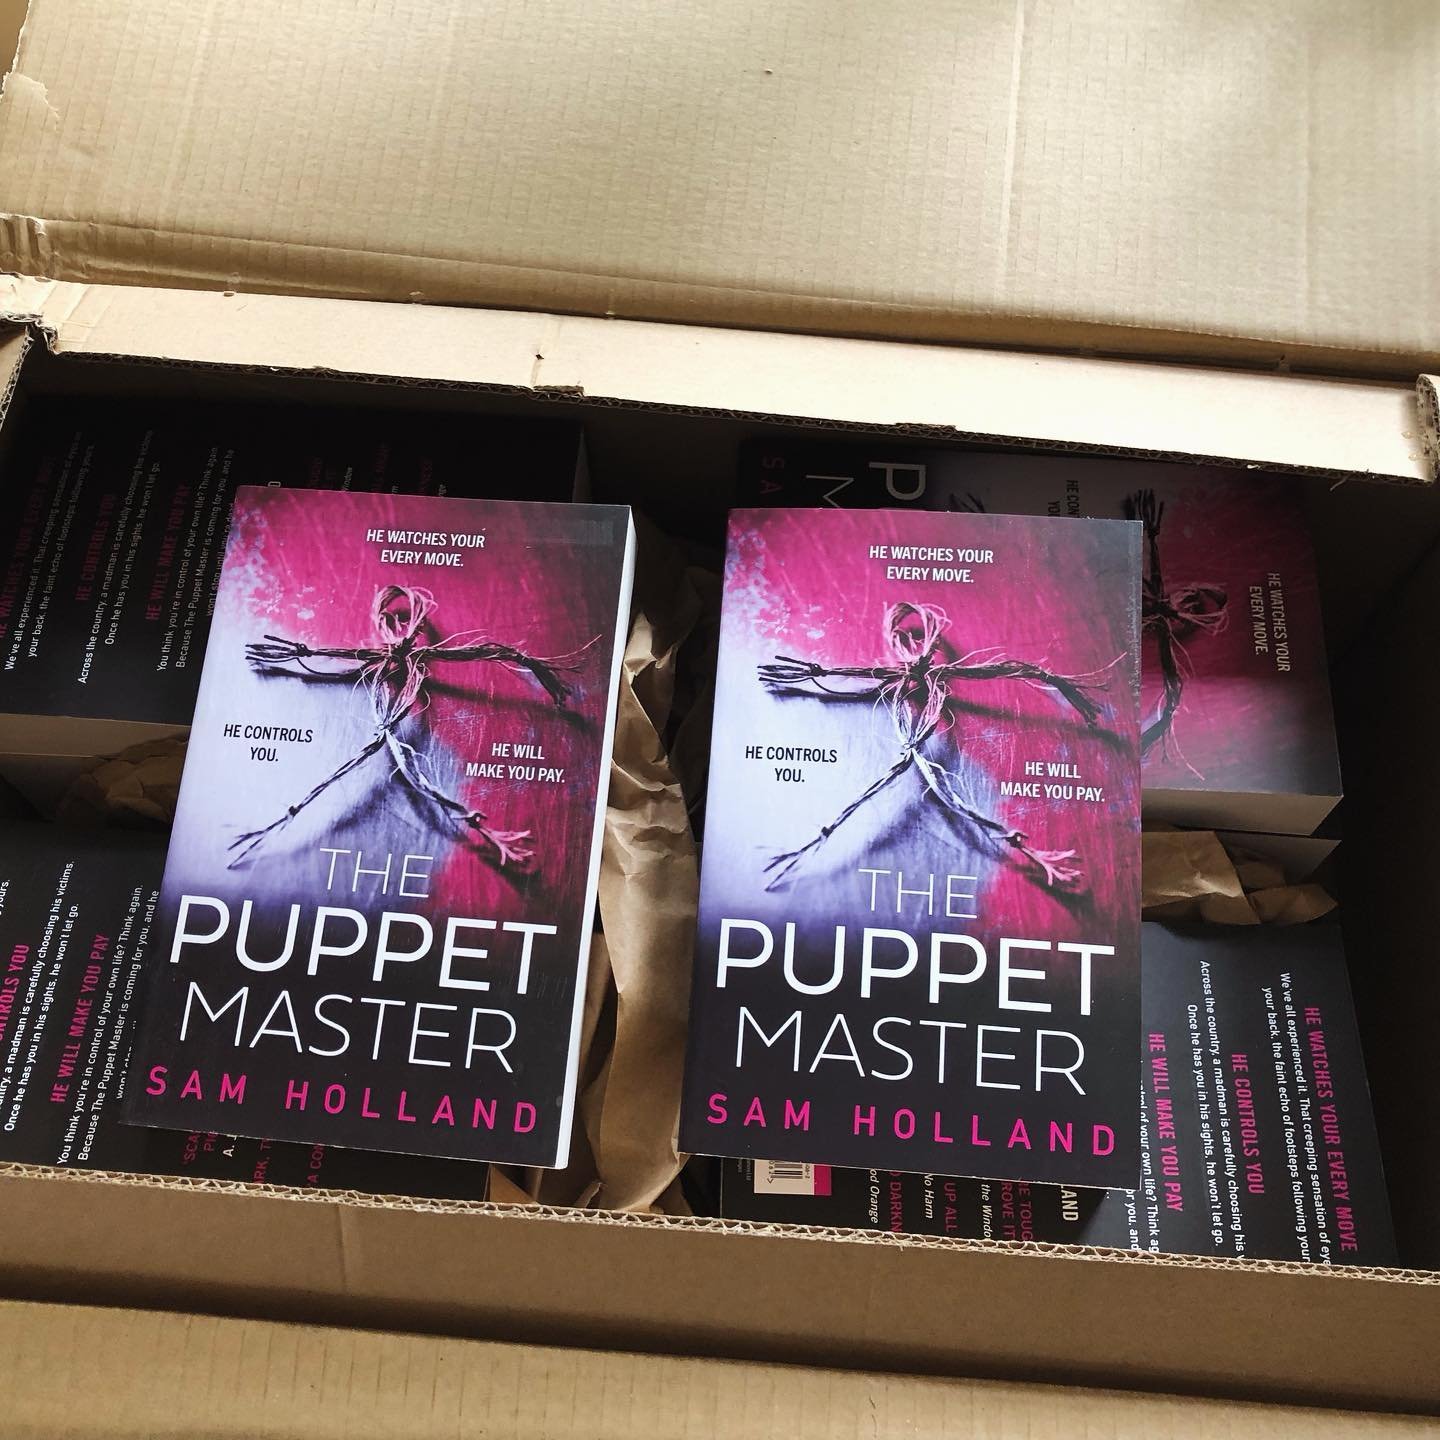 A few more shots of #thePuppetMaster looking very beautiful in person, and the back cover, showing what it&rsquo;s all about&hellip;